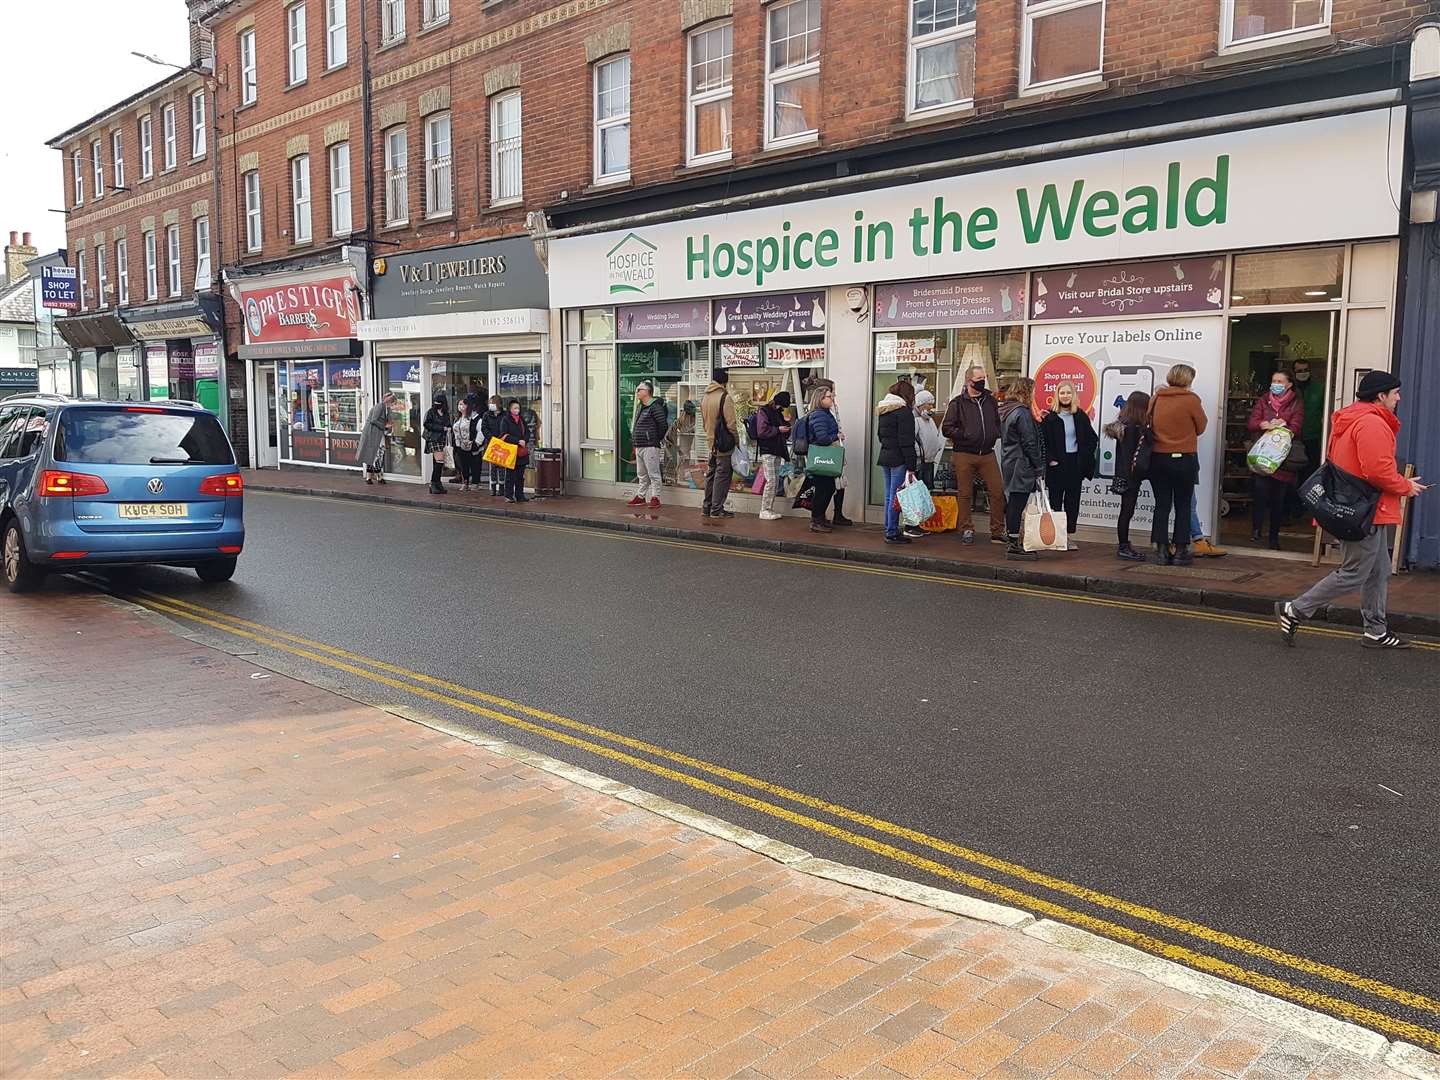 The queue for the Hospice in the Weald shop in Tunbridge Wells as restictions are lifted